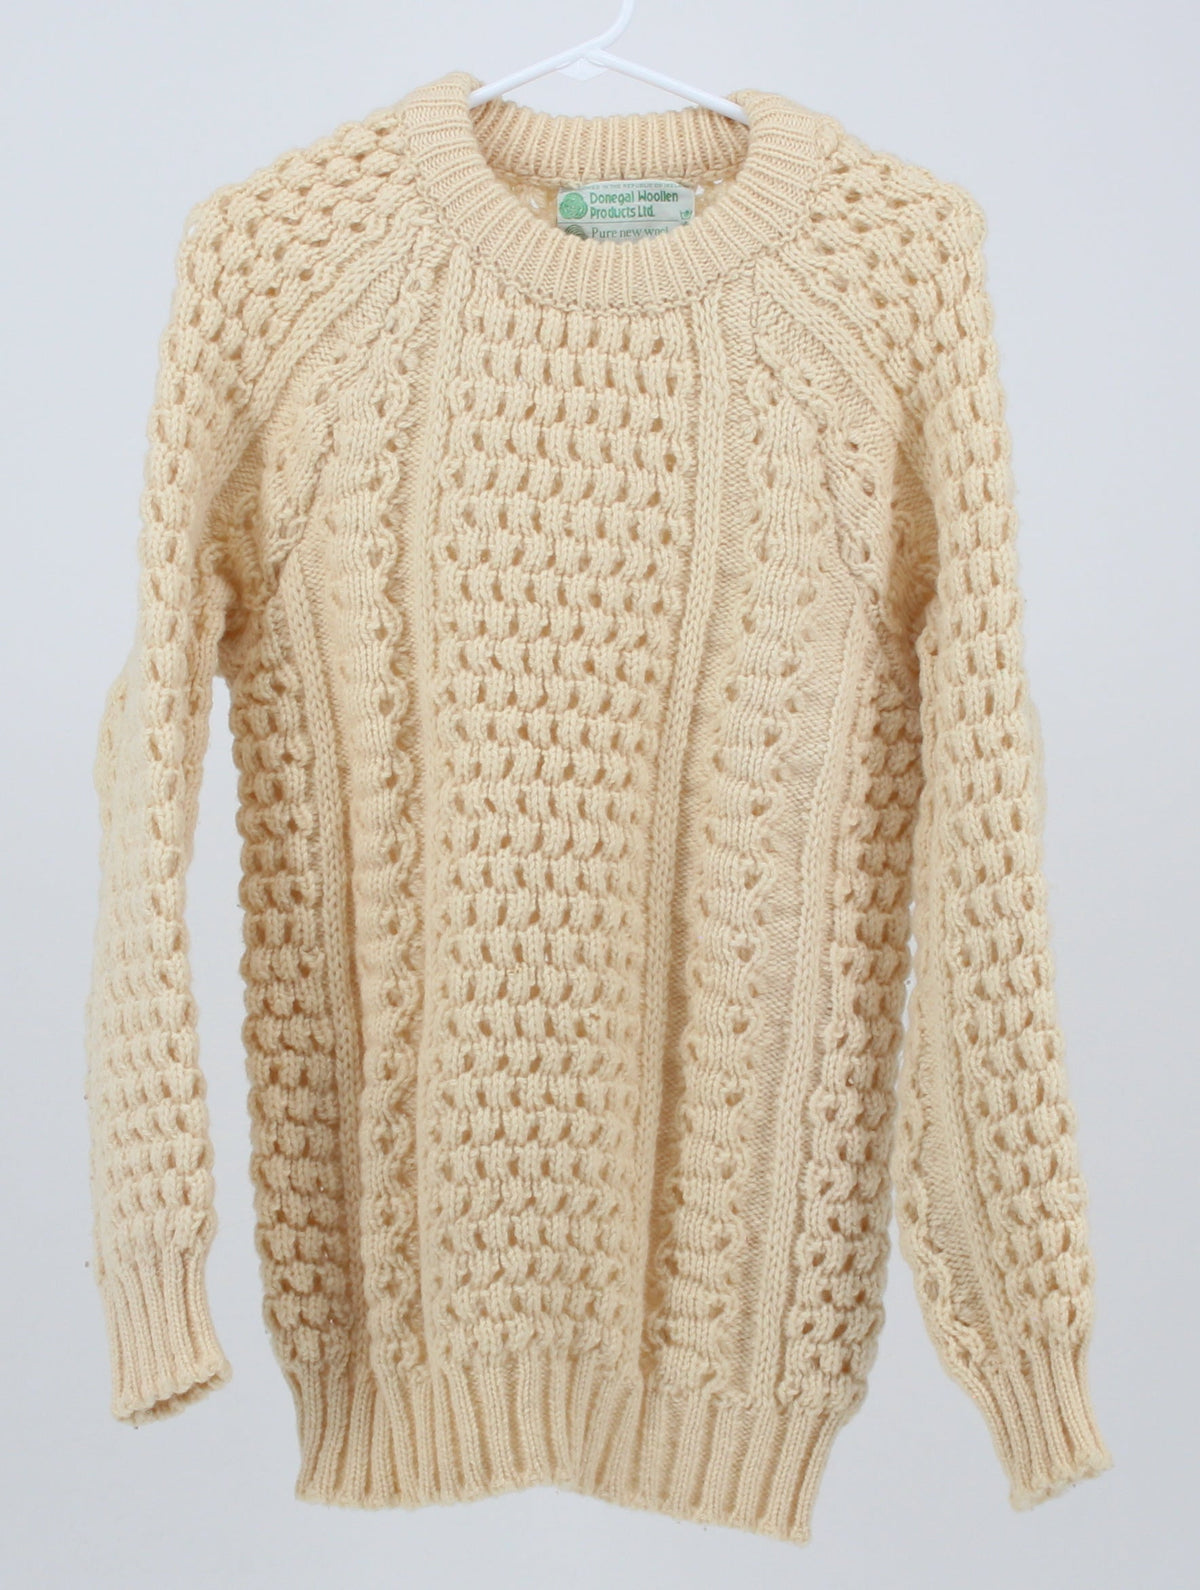 Dongegal Woollen Cream Products Ltd. Pure Wool Knitted Sweater